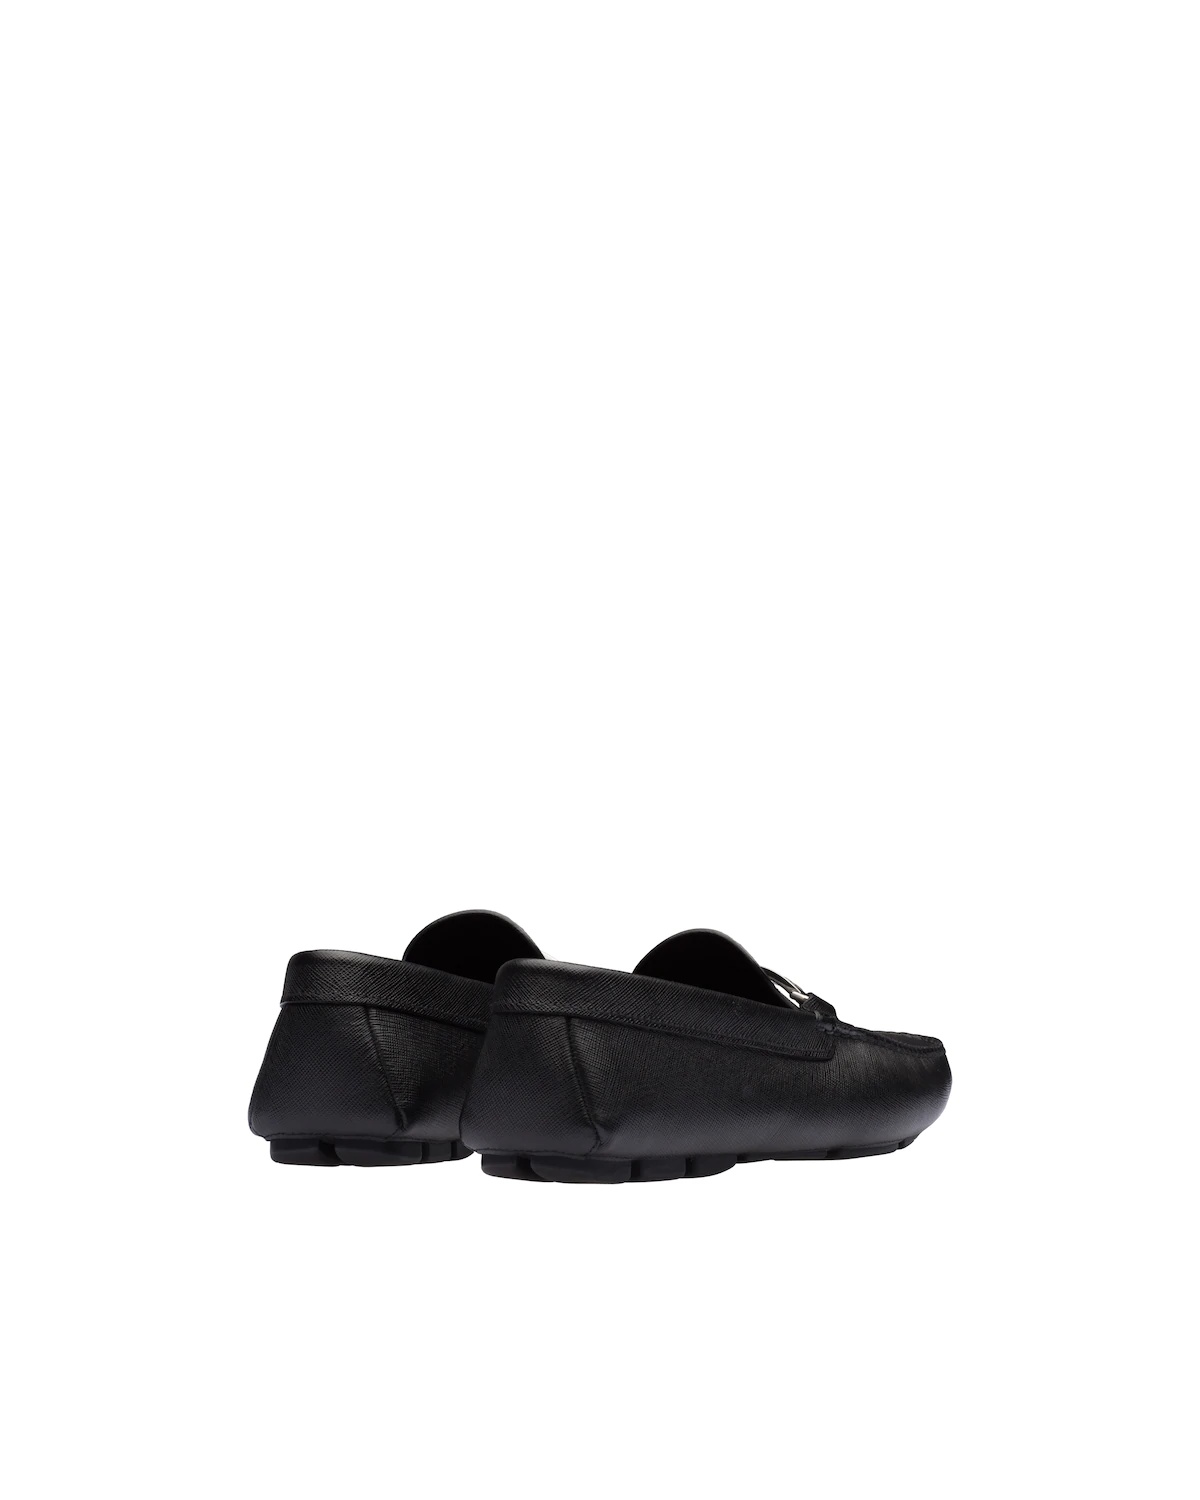 Saffiano leather loafers - 5